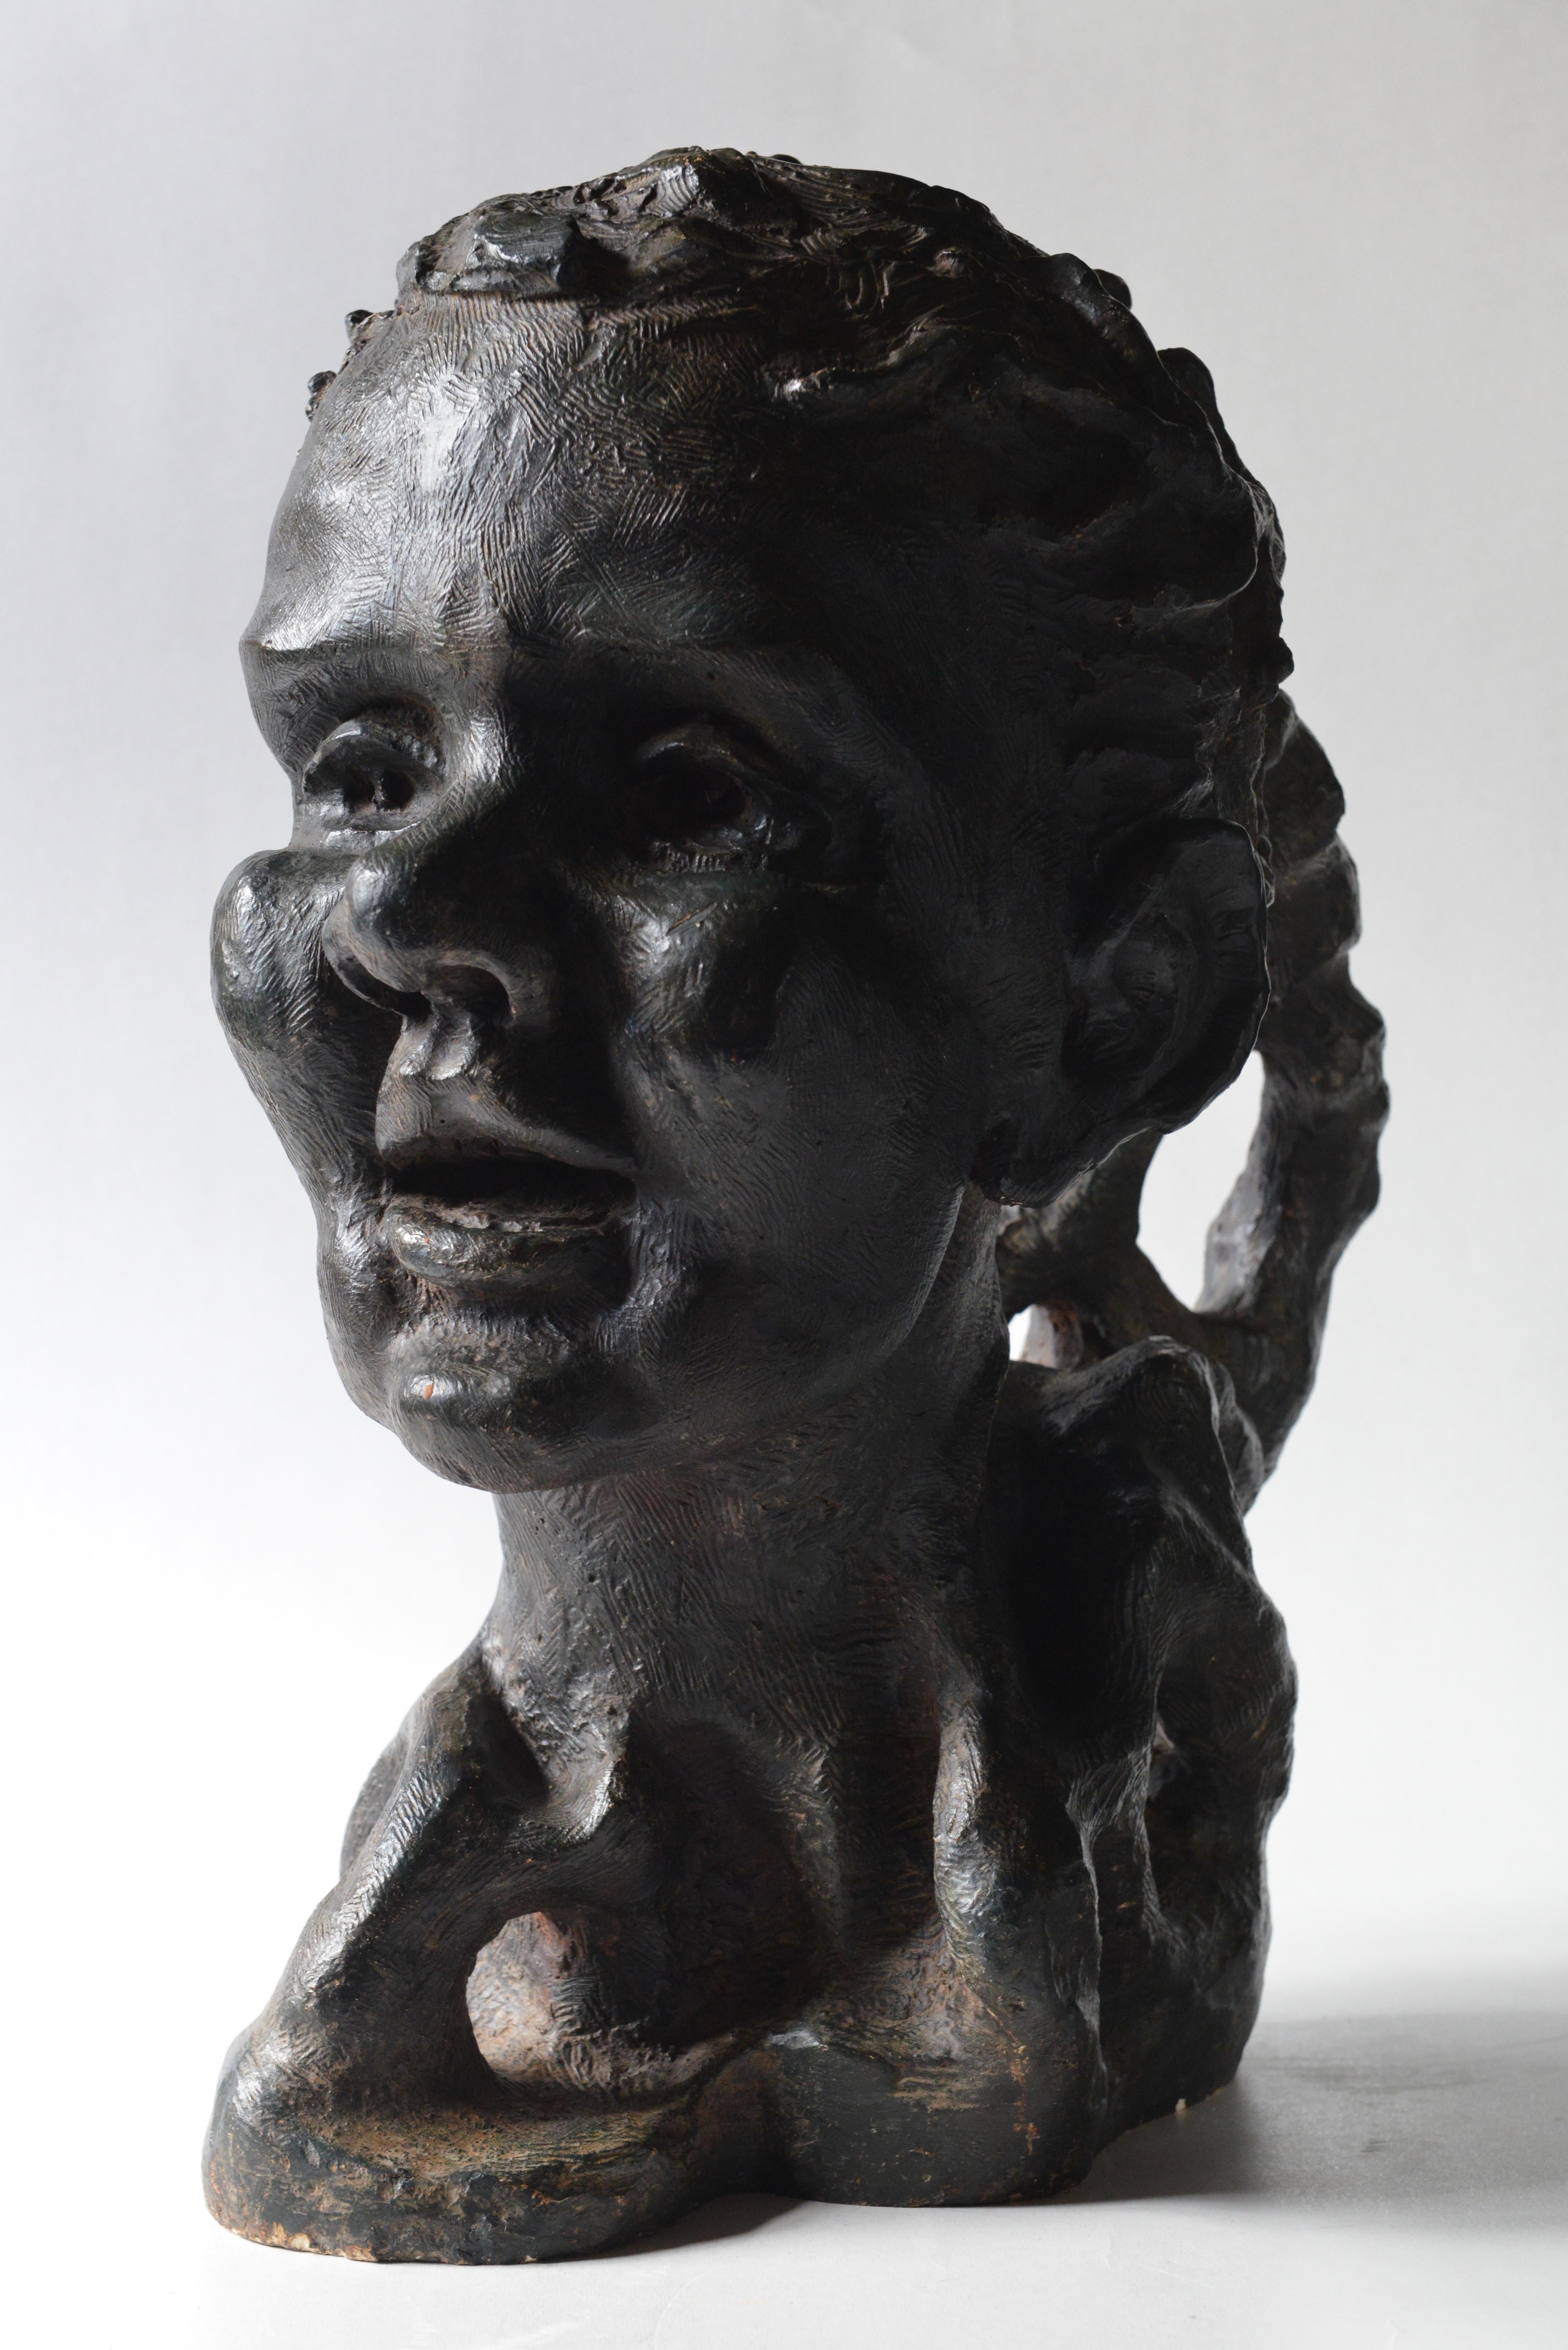 A bronze patinated plaster of a woman, her head covered with branches. 
The Greek mythology Philemon and Baucis story. Baucis saw Philemon begin to leaf out and Philemon saw Baucis leaf out too. Their faces remained at the top of the growing trees.